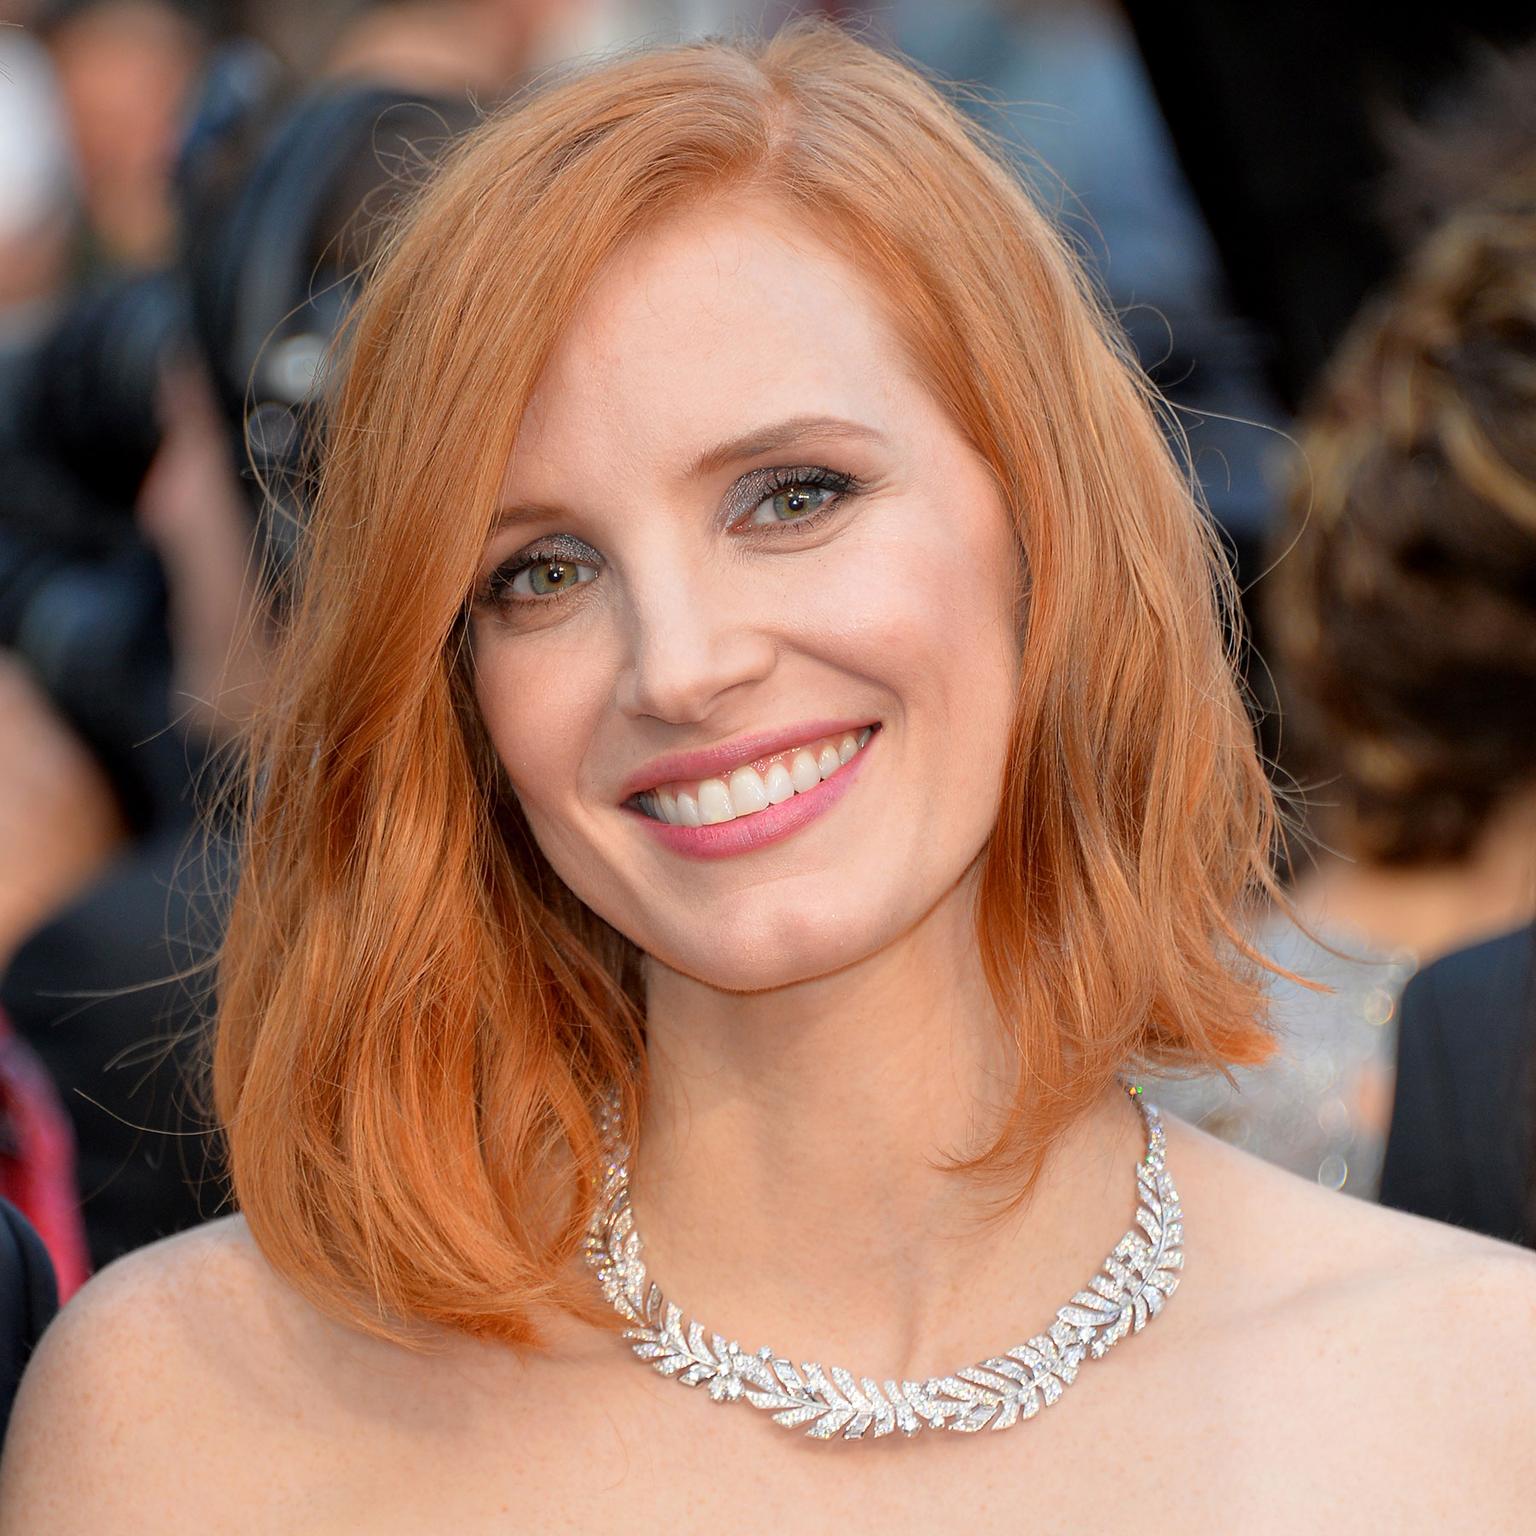 Cannes 2016 Day 1: Jessica Chastain in Piaget